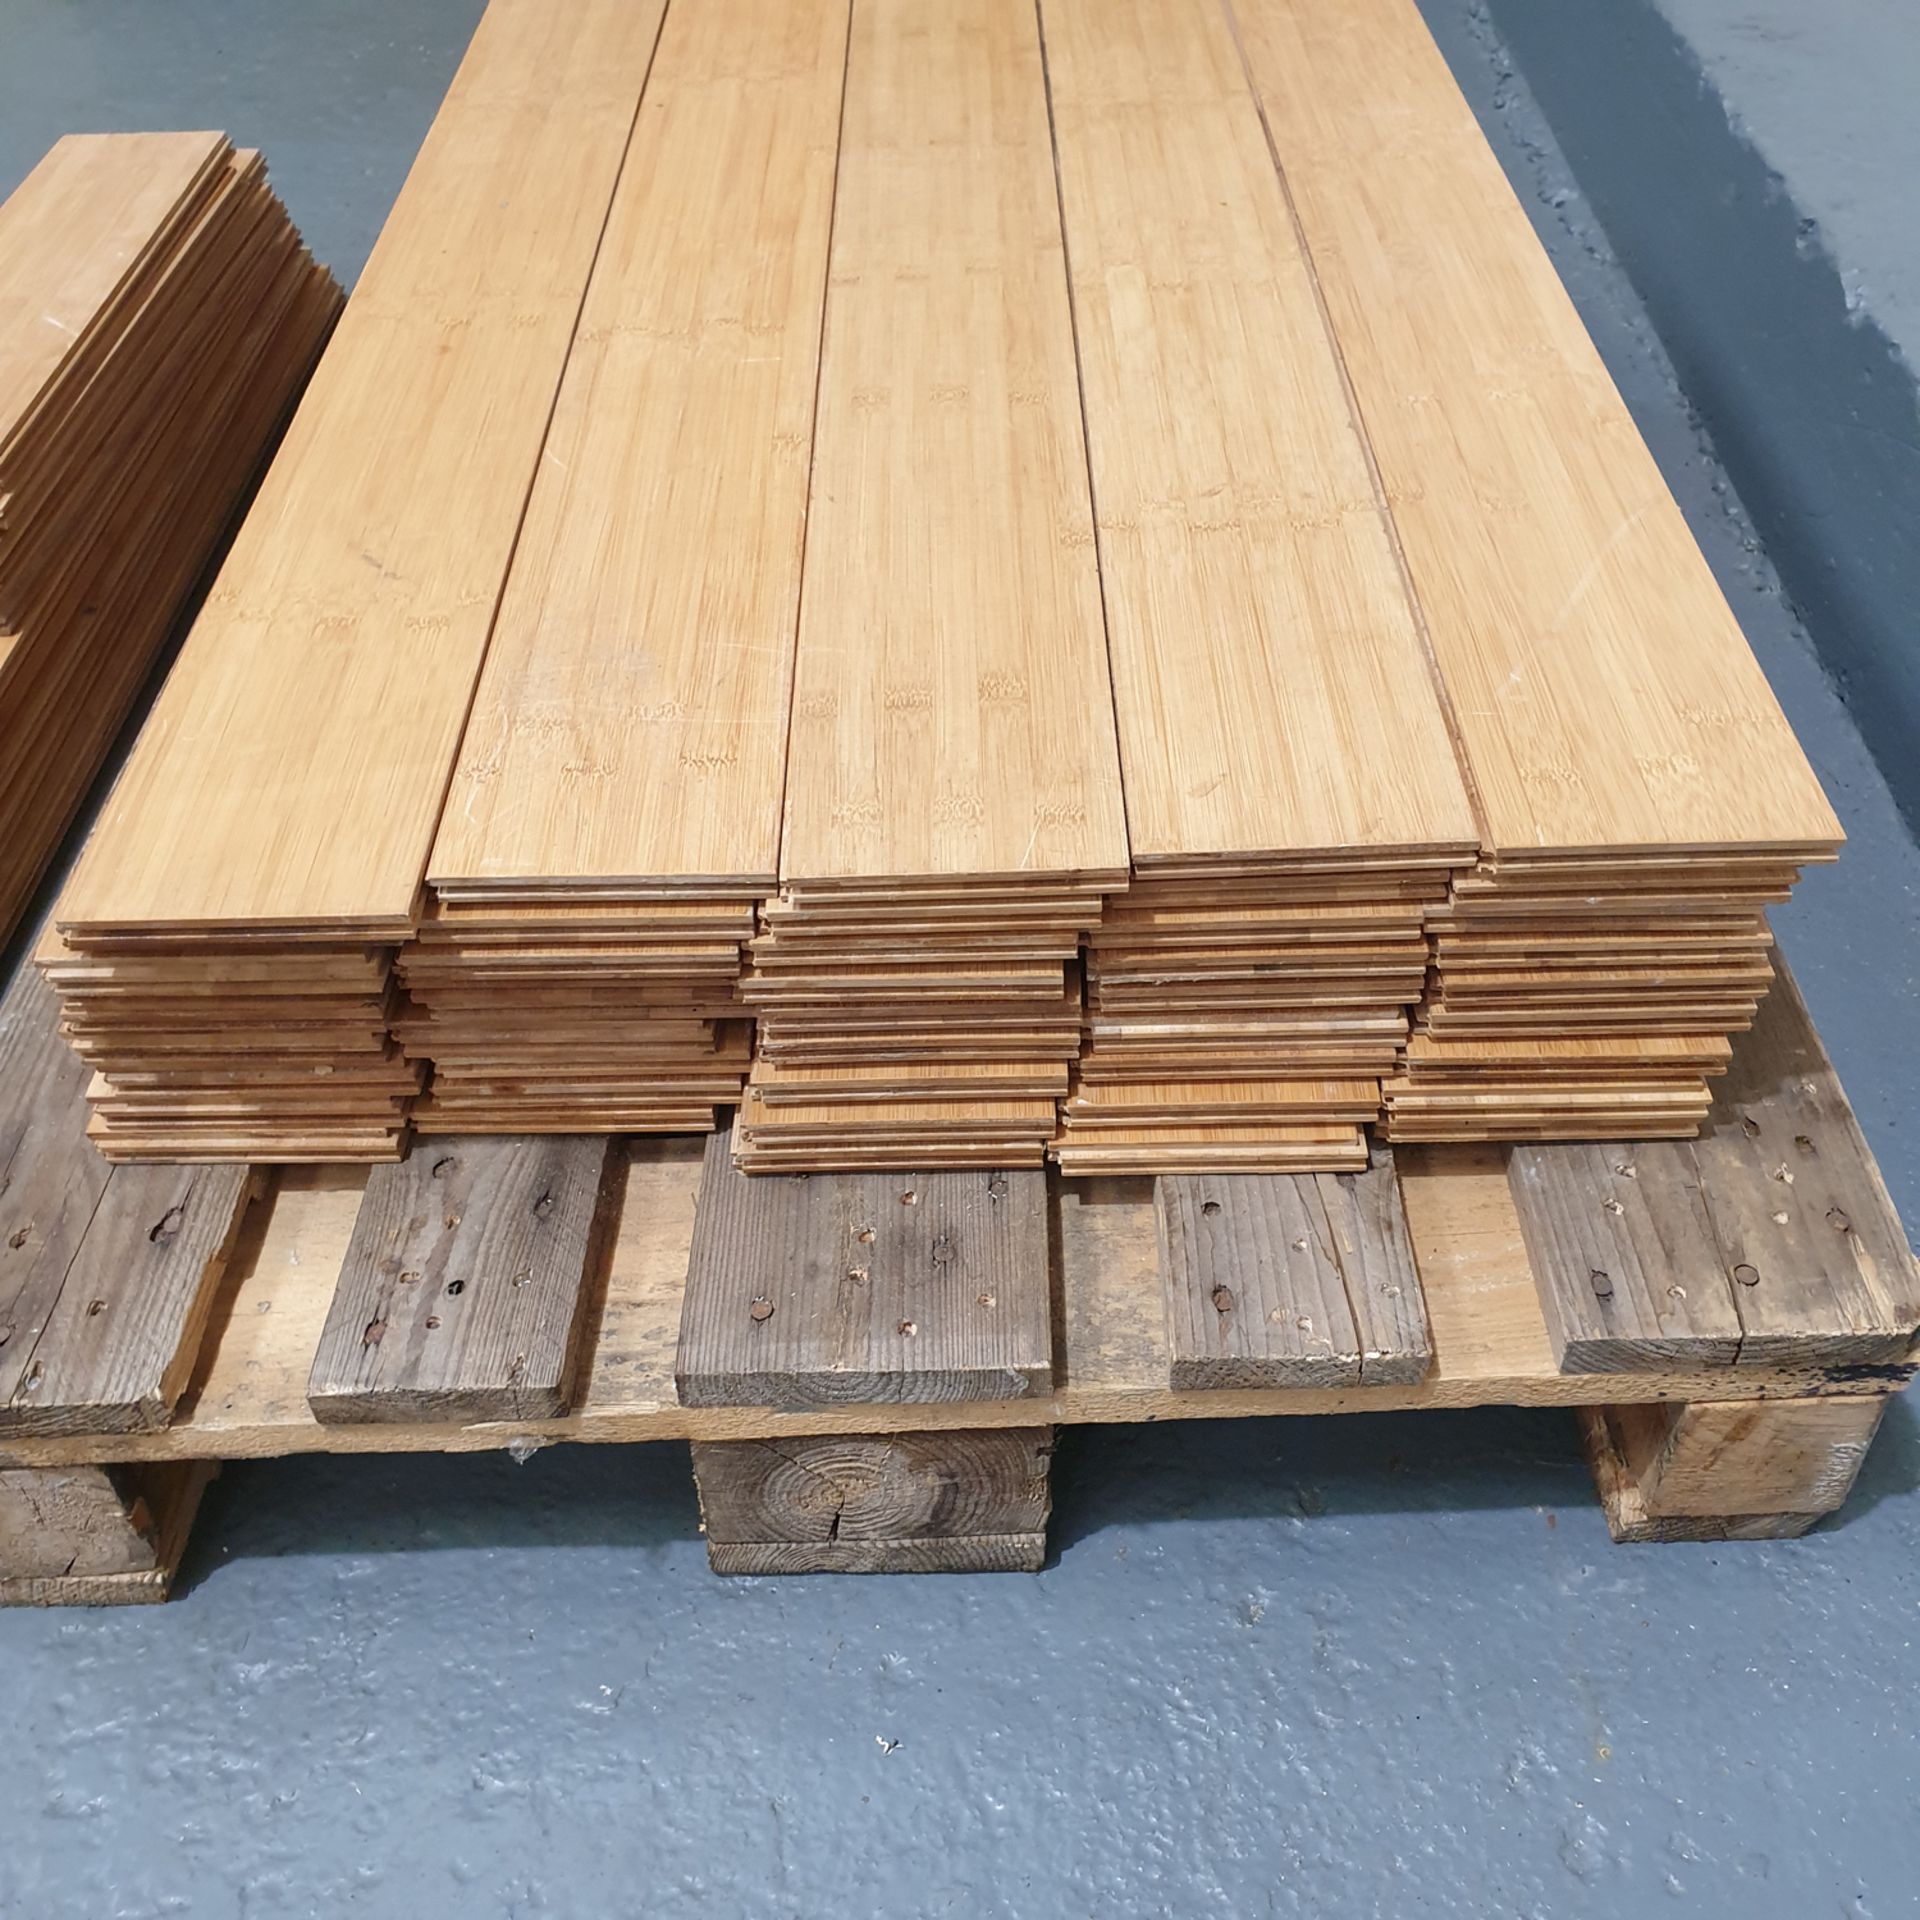 Hard Wood Flooring (Ply) With Additional Off Cuts. Approx 5 Square Meters. - Image 4 of 5